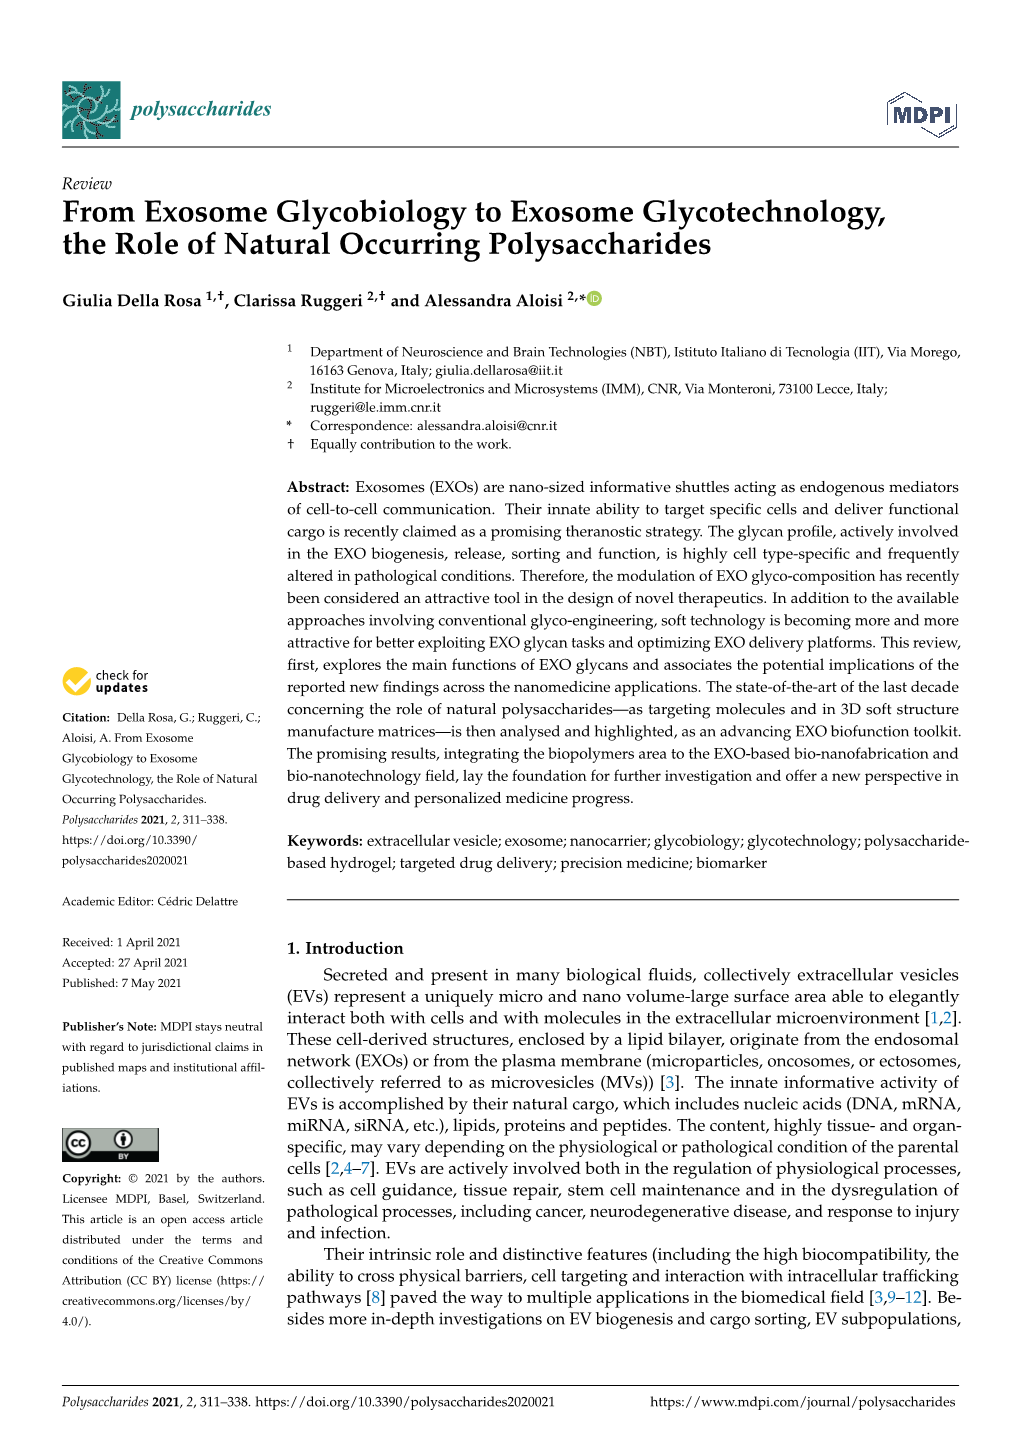 From Exosome Glycobiology to Exosome Glycotechnology, the Role of Natural Occurring Polysaccharides